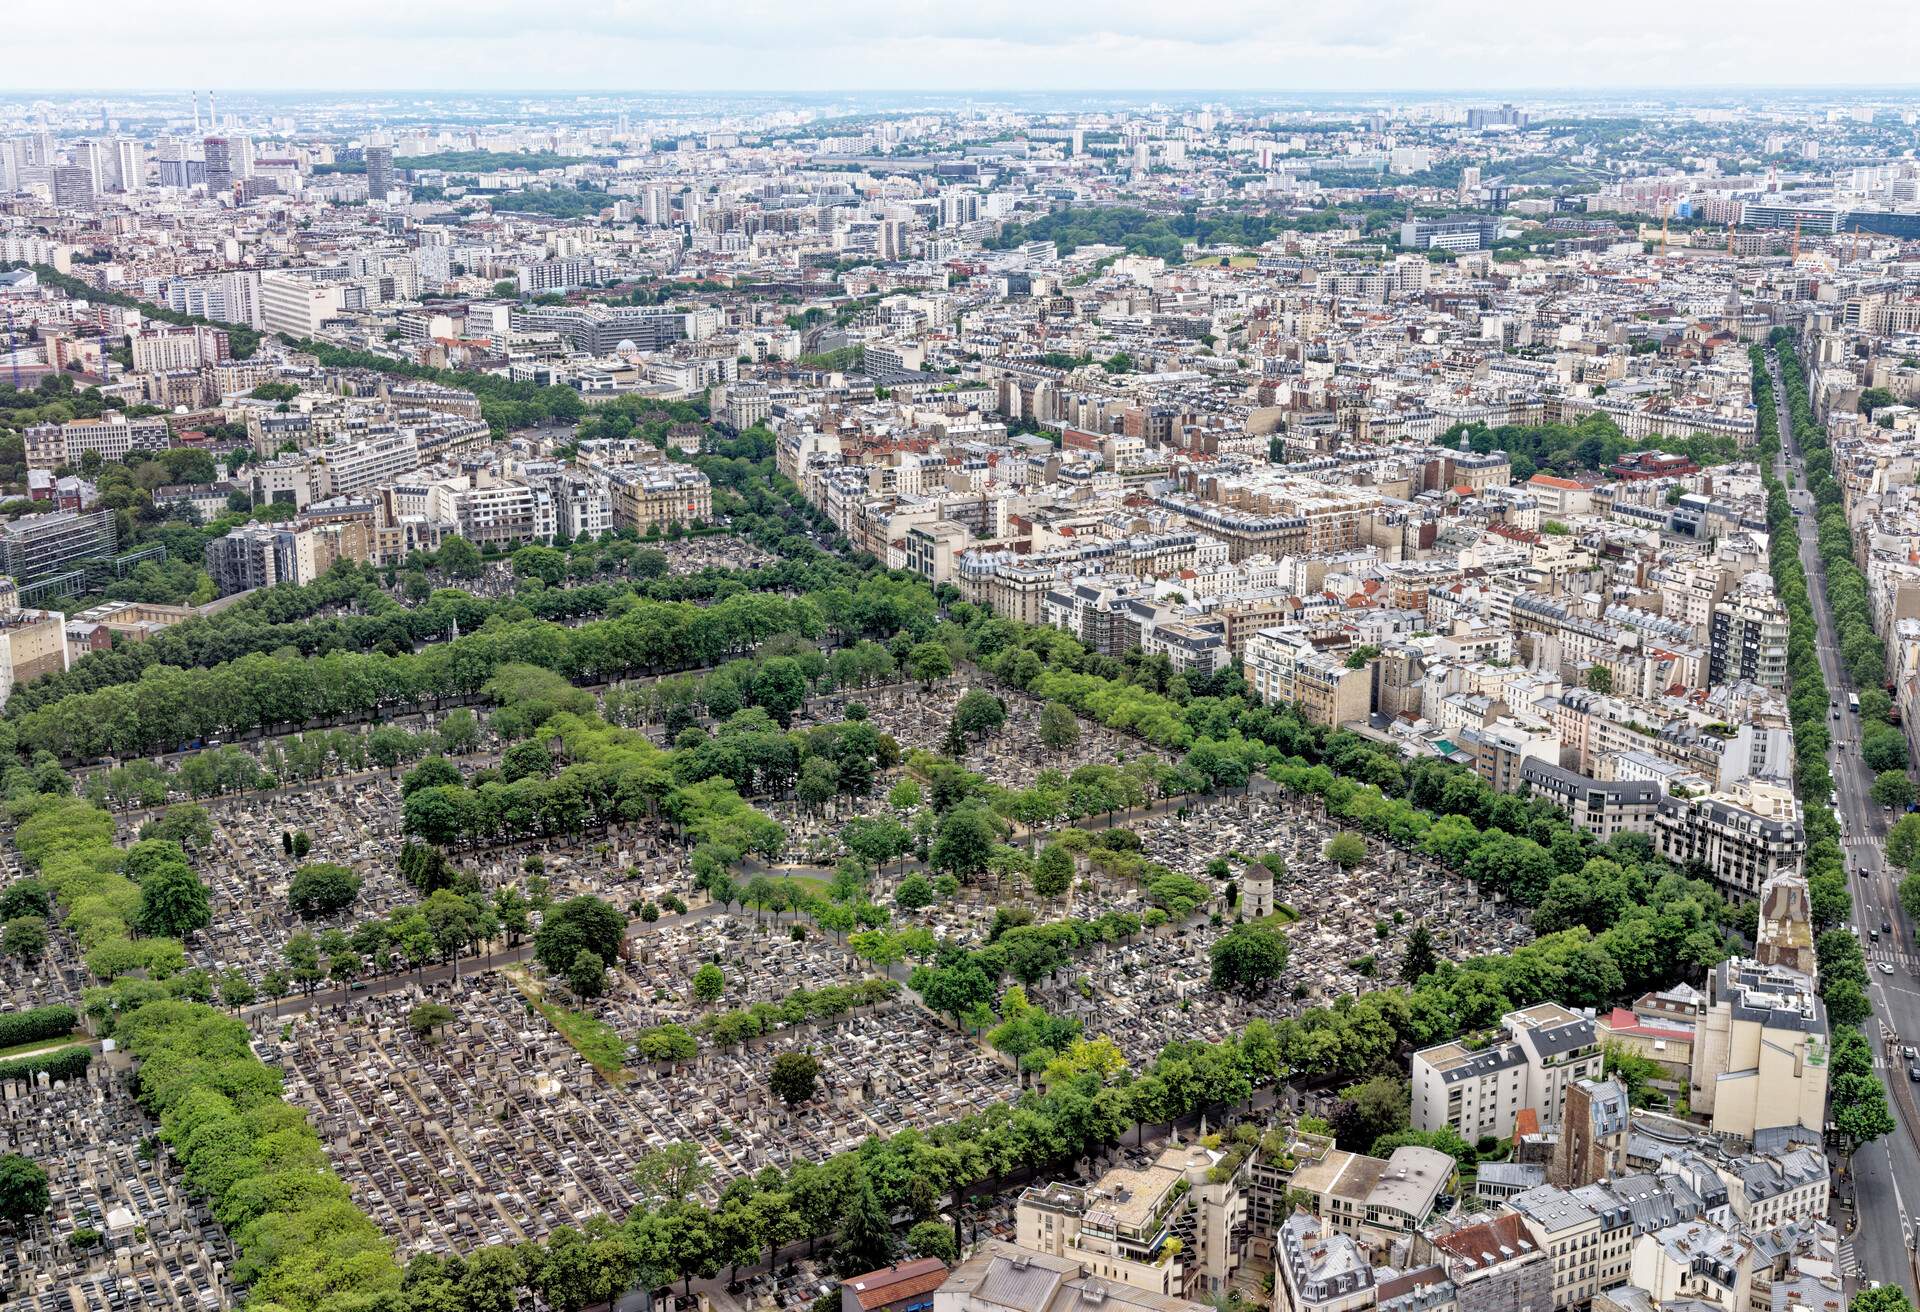 An aerial view of a big cemetery in the middle of Paris